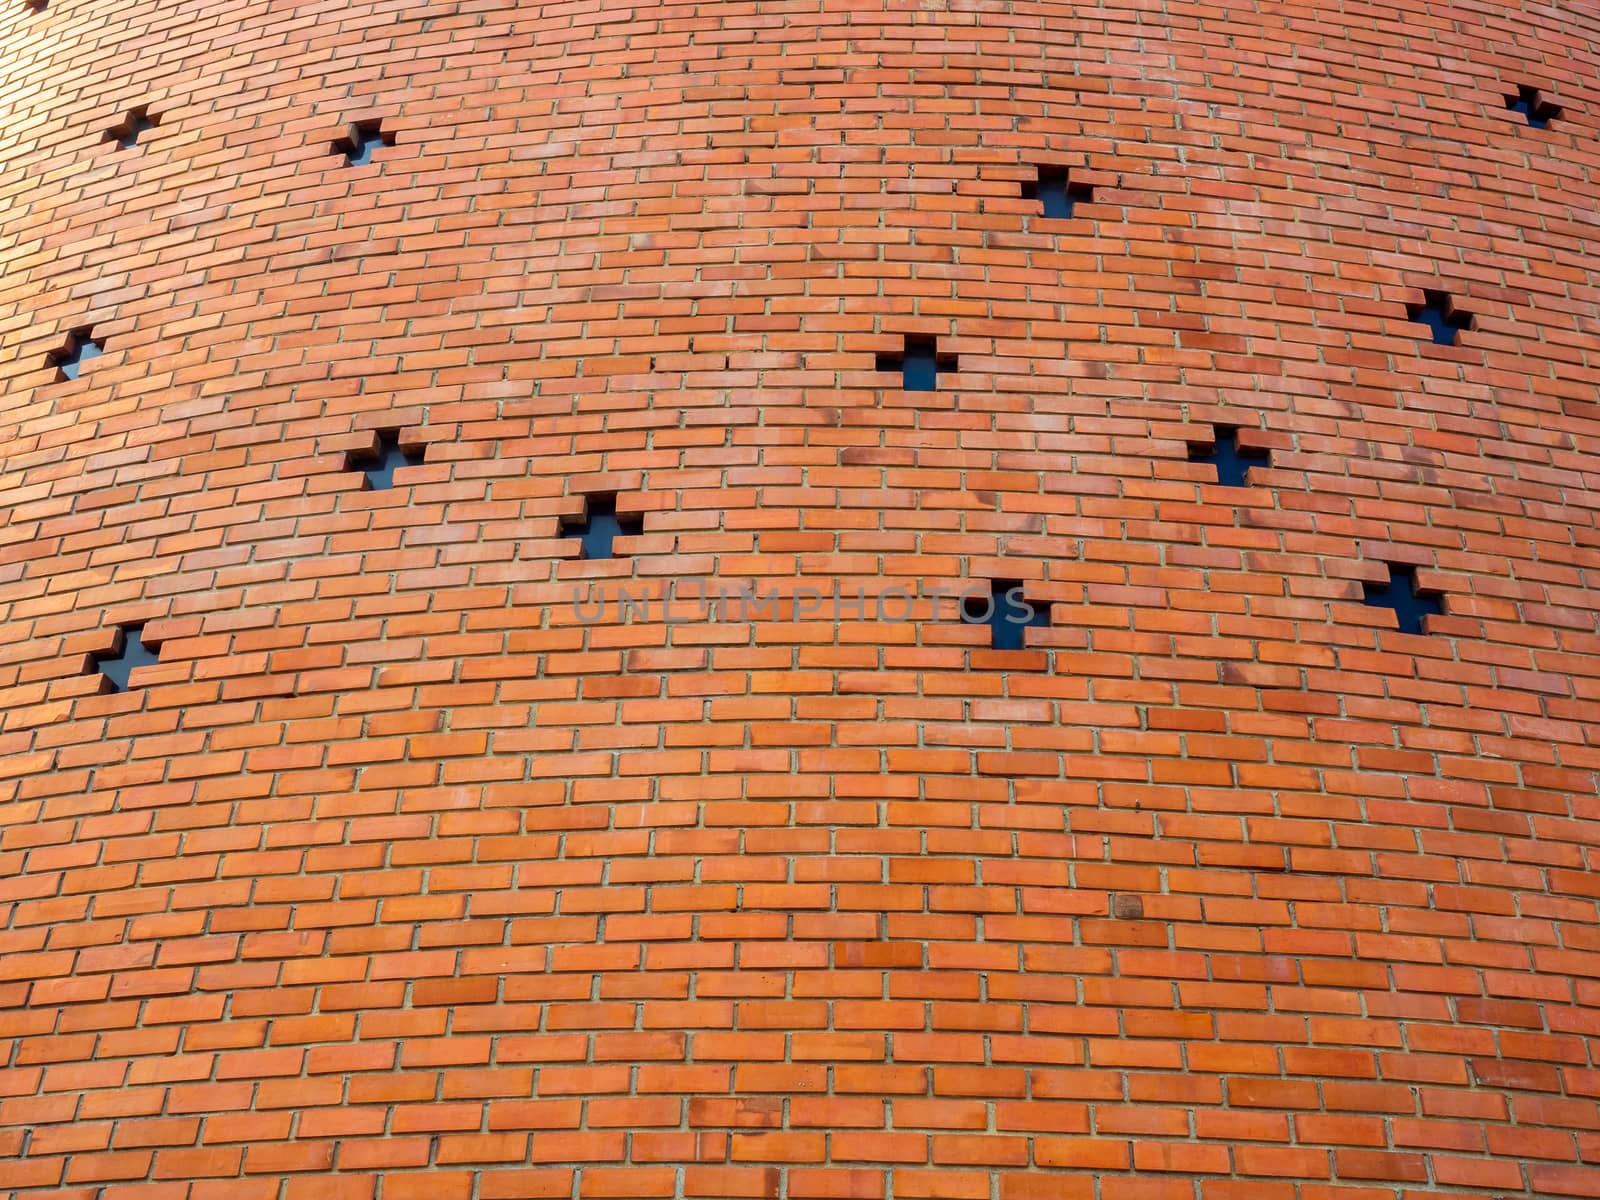 Red brick wall background with cross shaped window. Seamless brick wall texture building.